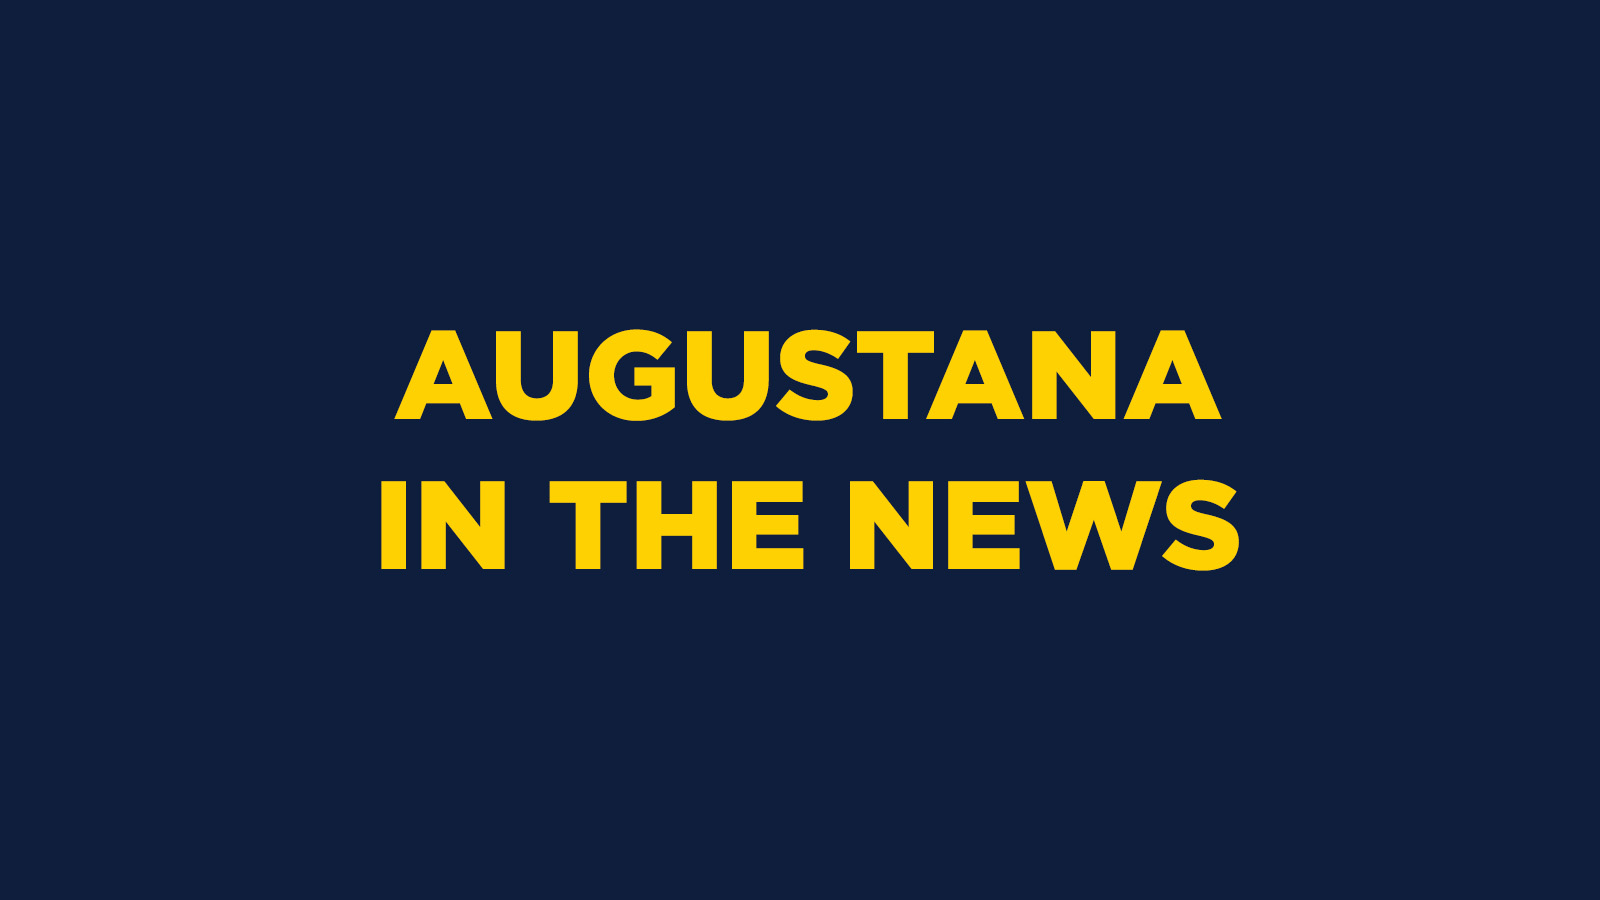 AUGUSTANA IN THE NEWS